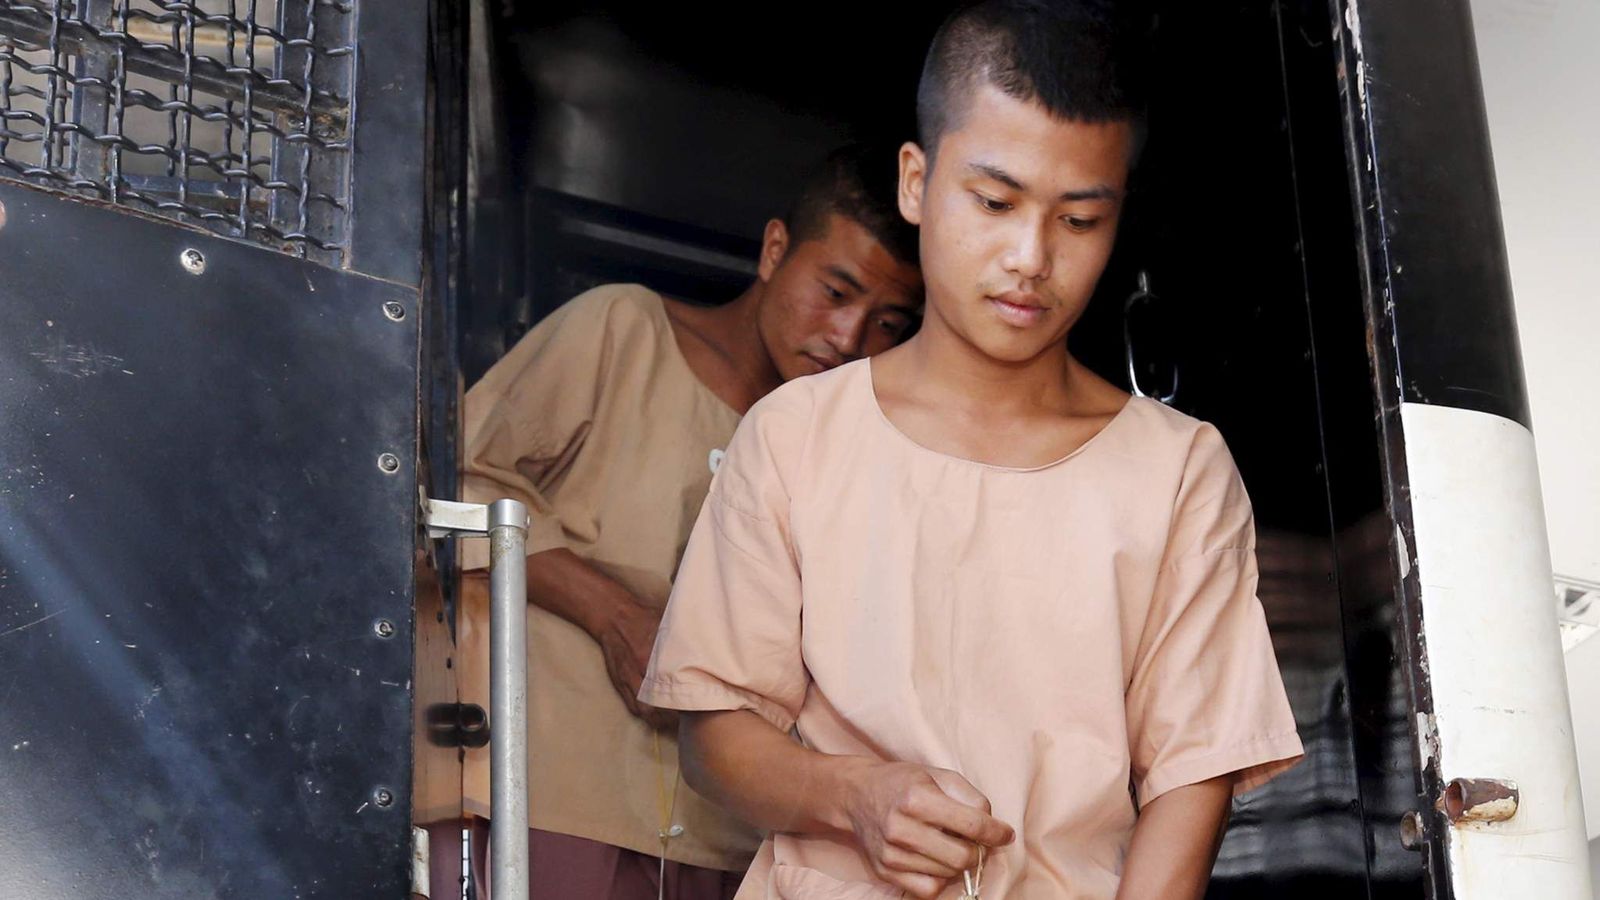 Thai Murders Suspects Dna Not On Weapon Uk News Sky News 